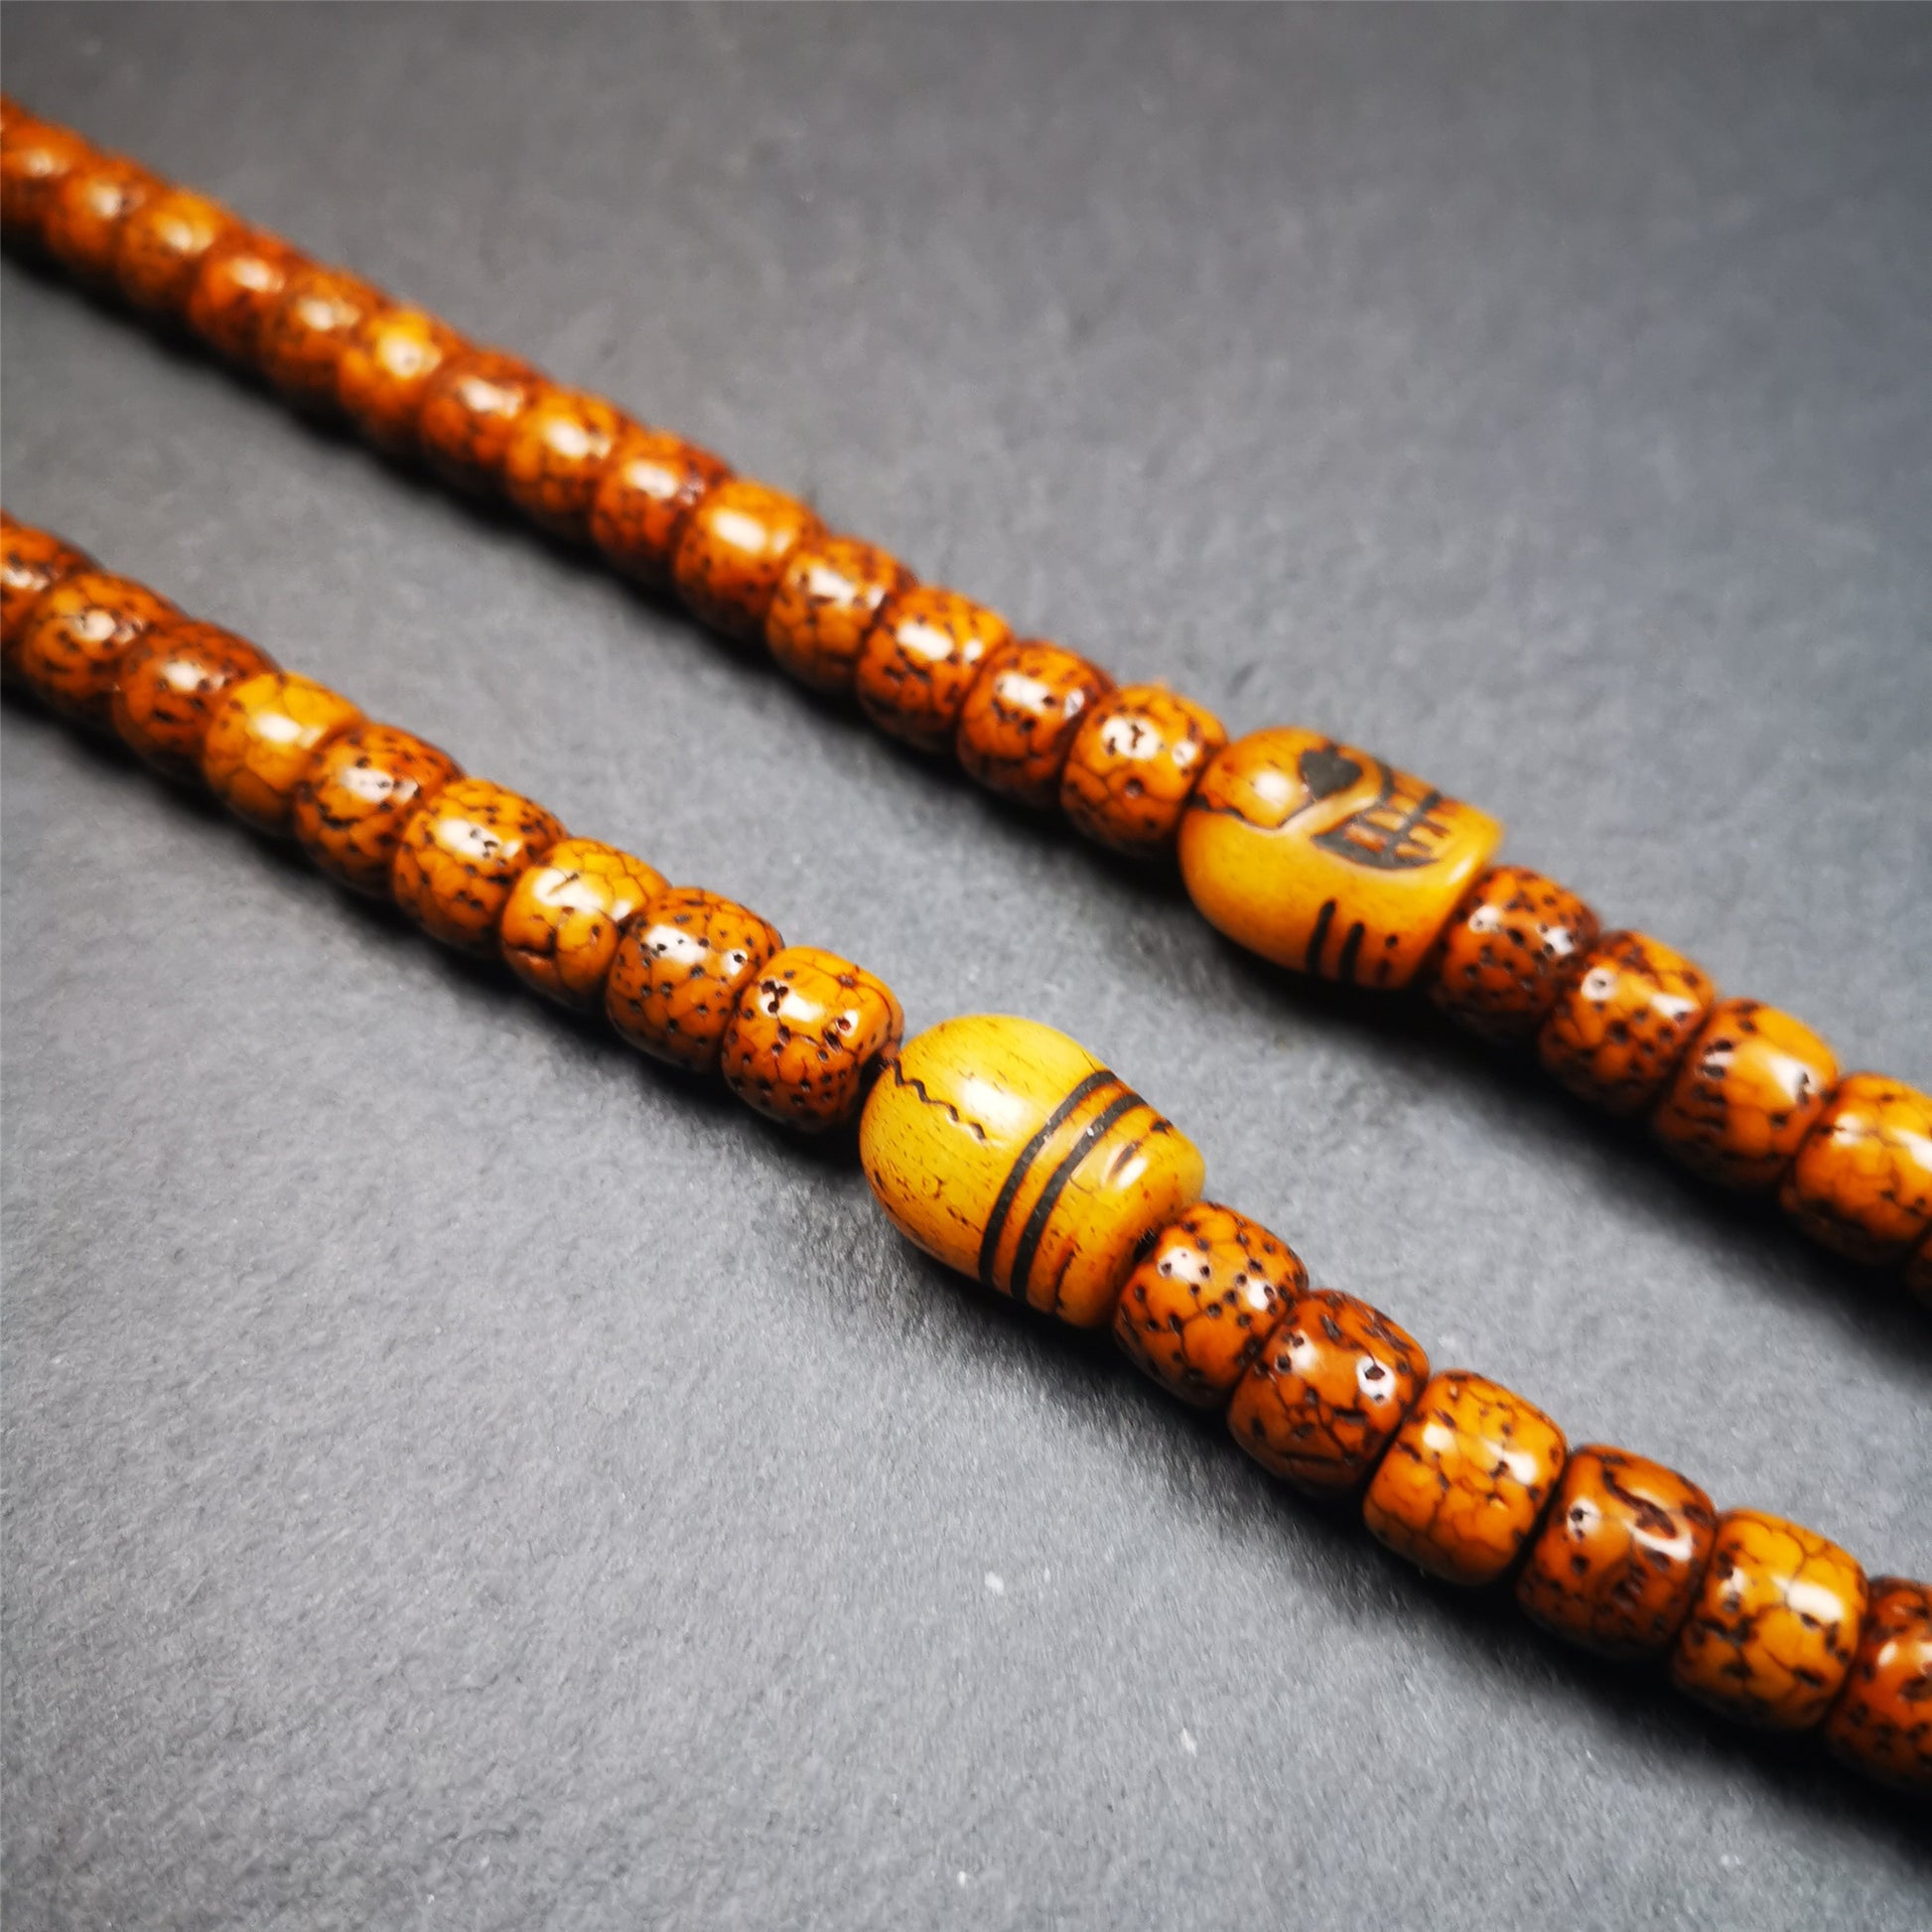 These marker beads were handmade by Tibetan craftsmen and come from Hepo Town, Baiyu County, the birthplace of the famous Tibetan handicrafts. It is made of yak bone,carved skull pattern,beige color,size is 0.4" × 0.5". Fit for 6-10mm mala (The reference in the photo is 7mm mala)